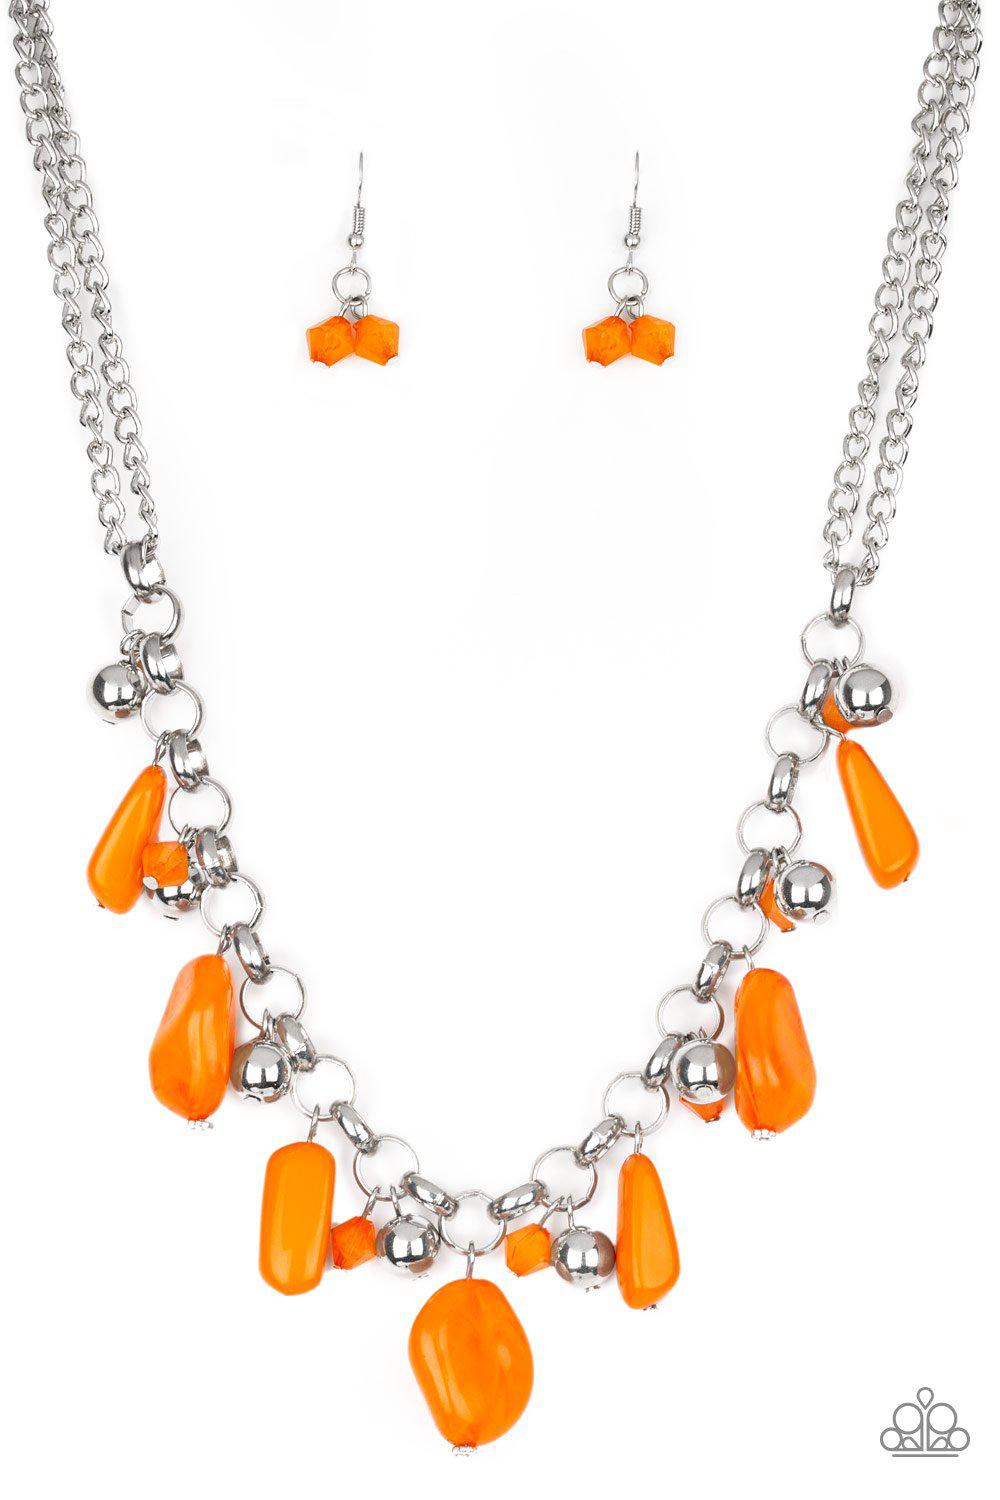 Grand Canyon Grotto Silver and Orange Necklace - Paparazzi Accessories-CarasShop.com - $5 Jewelry by Cara Jewels